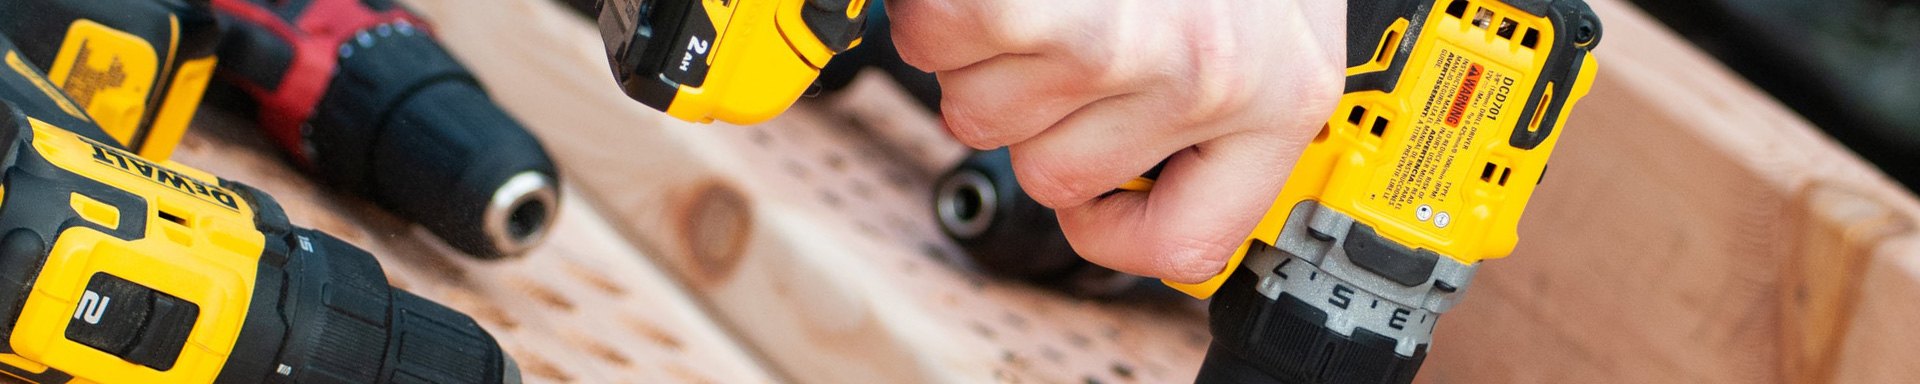 iD Select Power Drills & Drivers